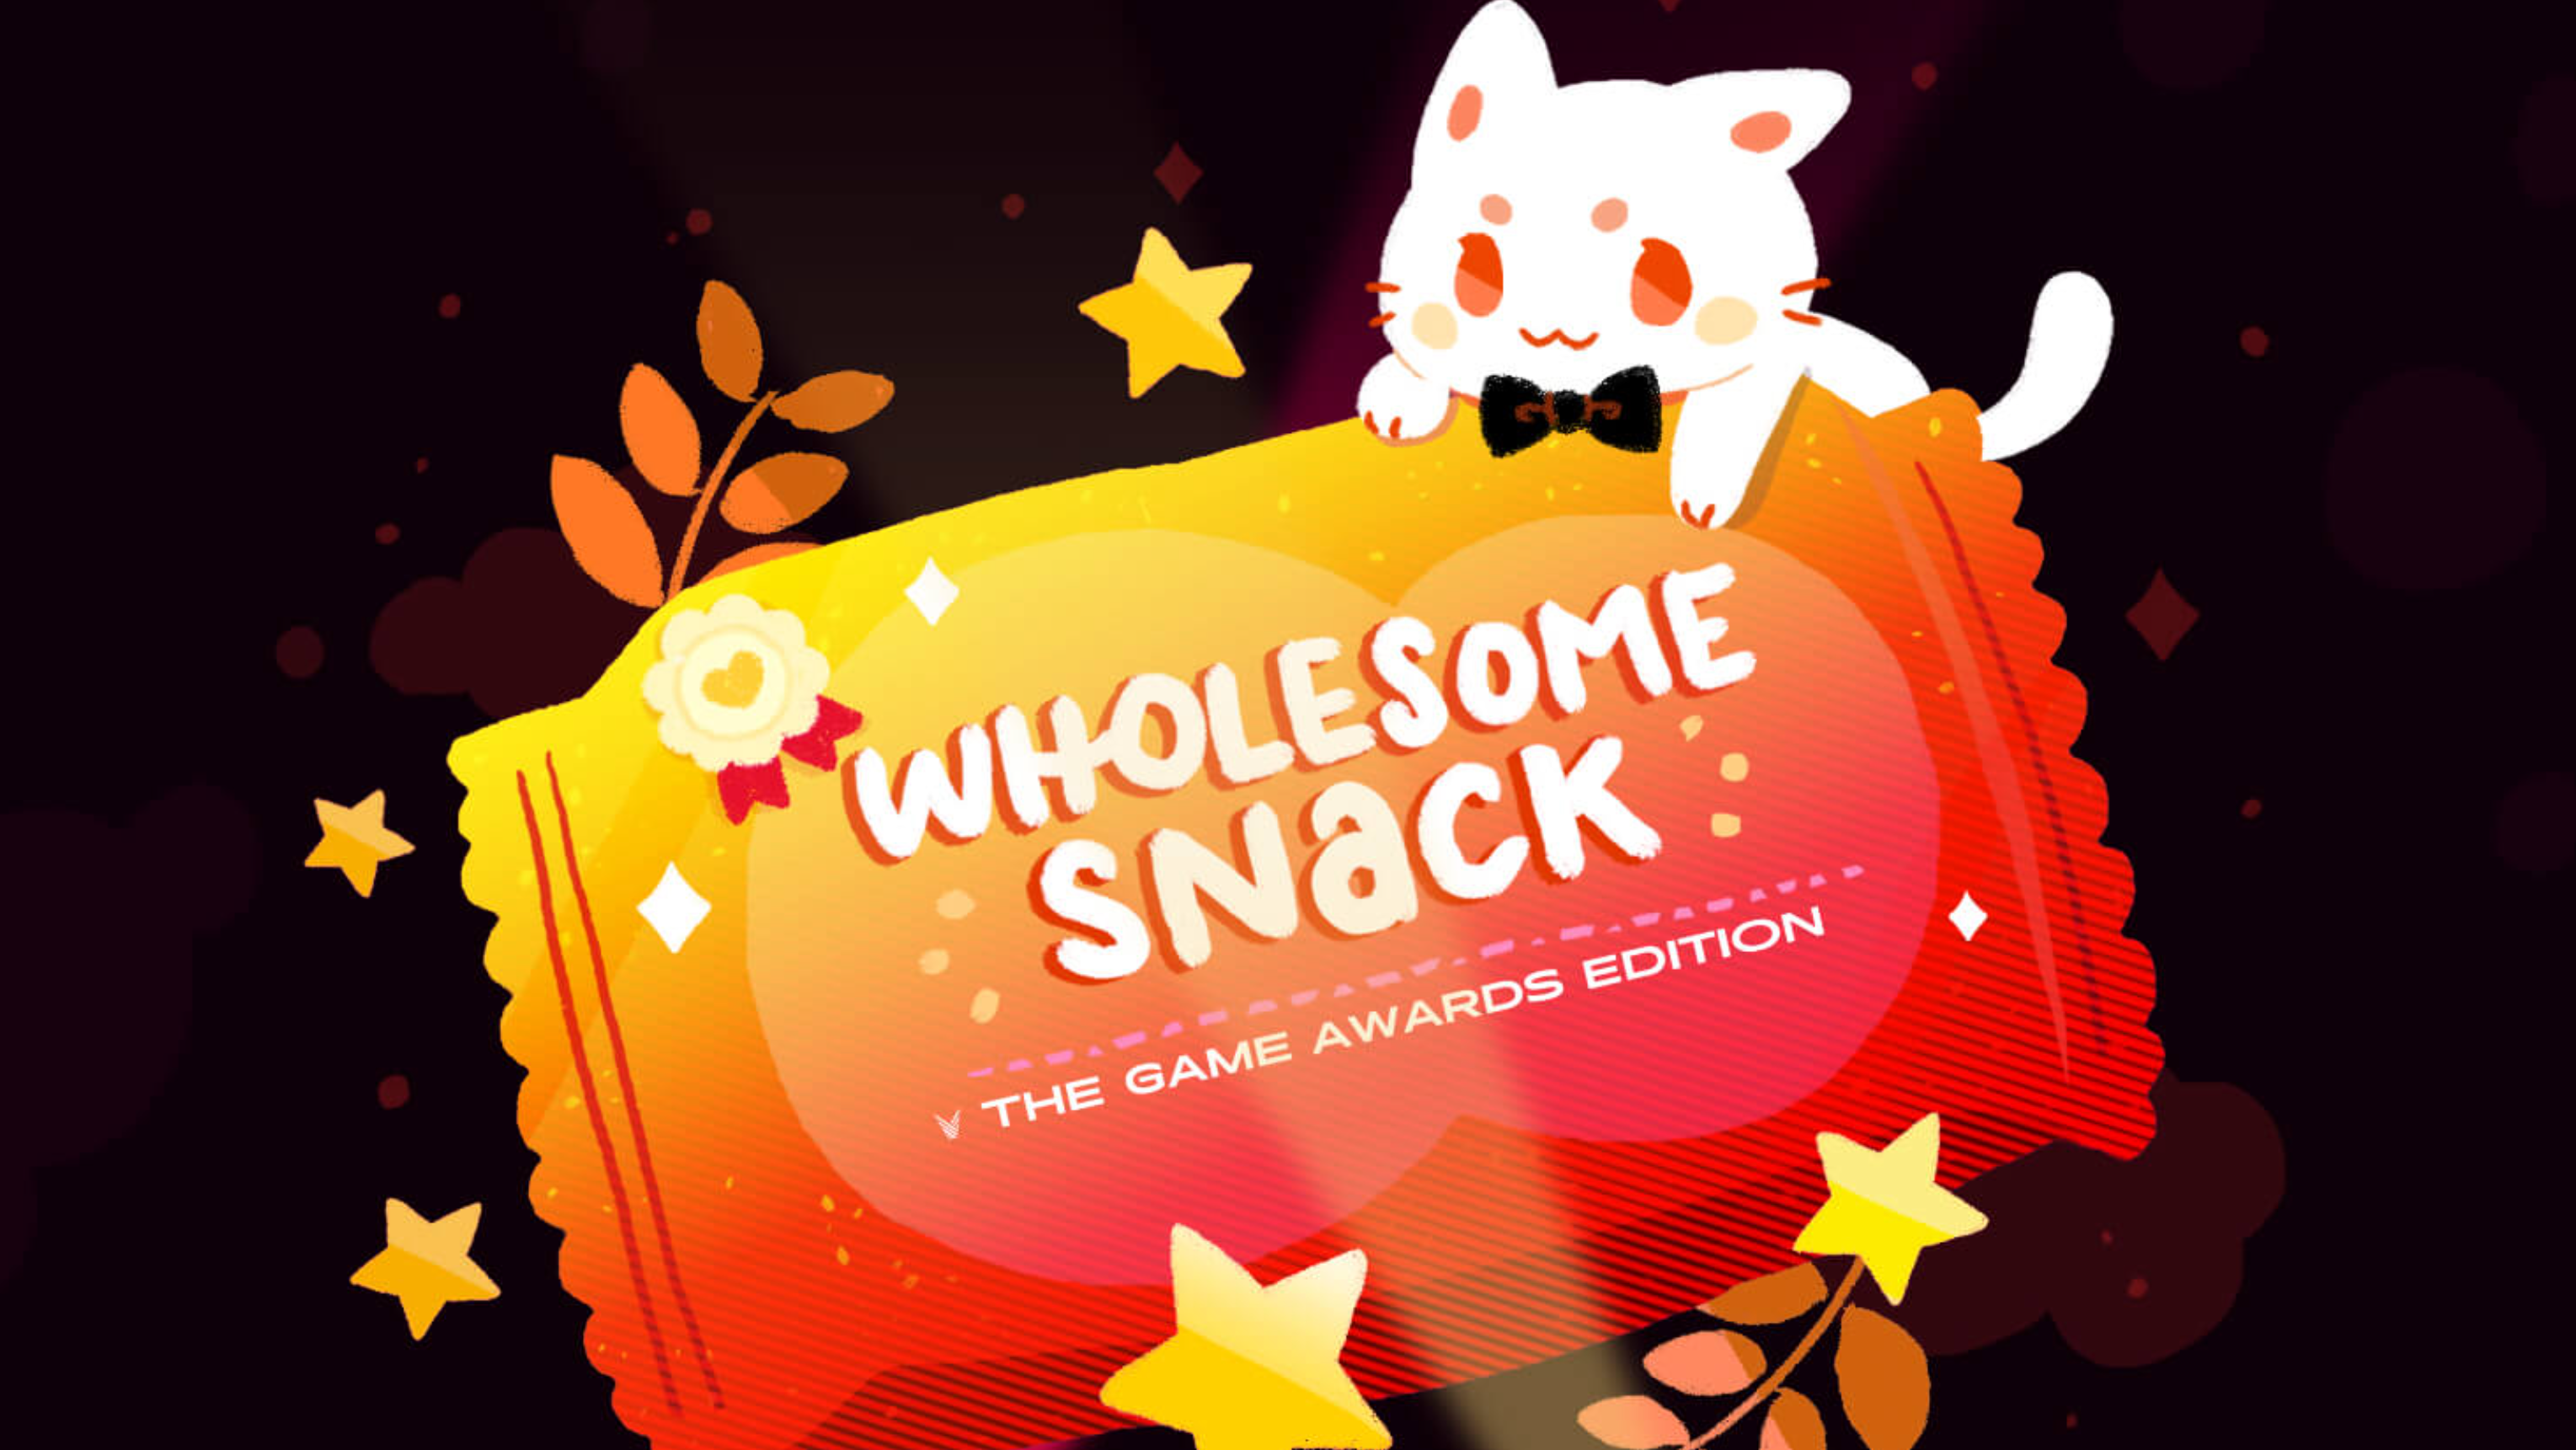 Breaking Down Wholesome Snack: The Game Awards Edition